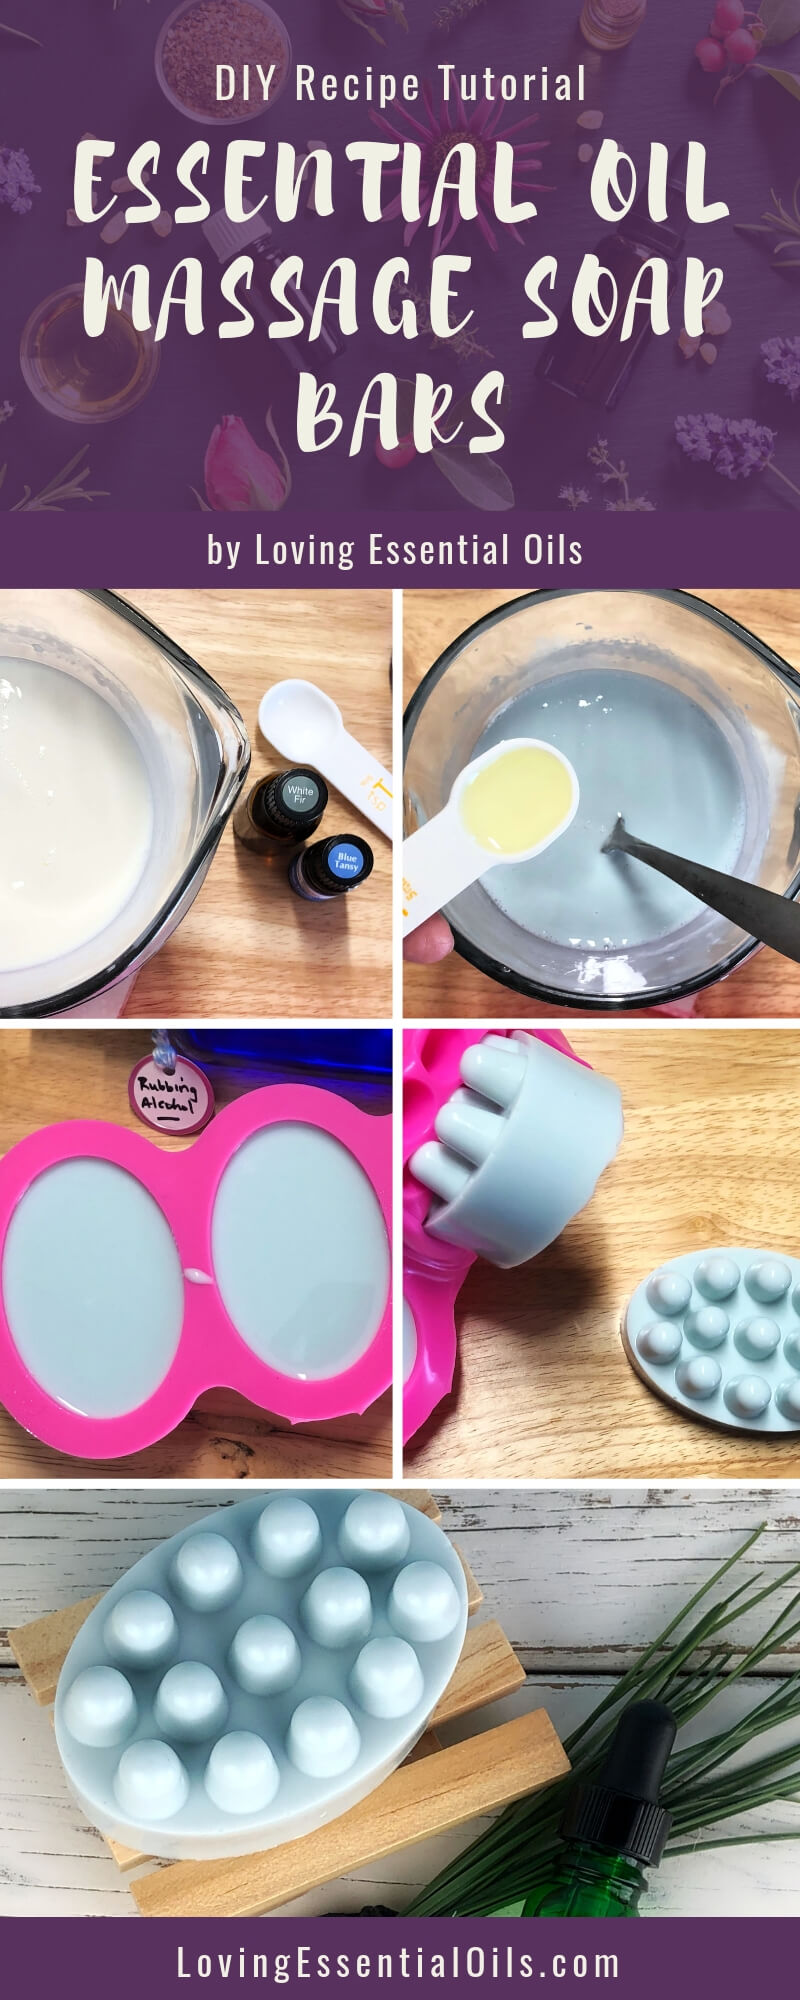 How to make bar soap with essential oils by Loving Essential Oils